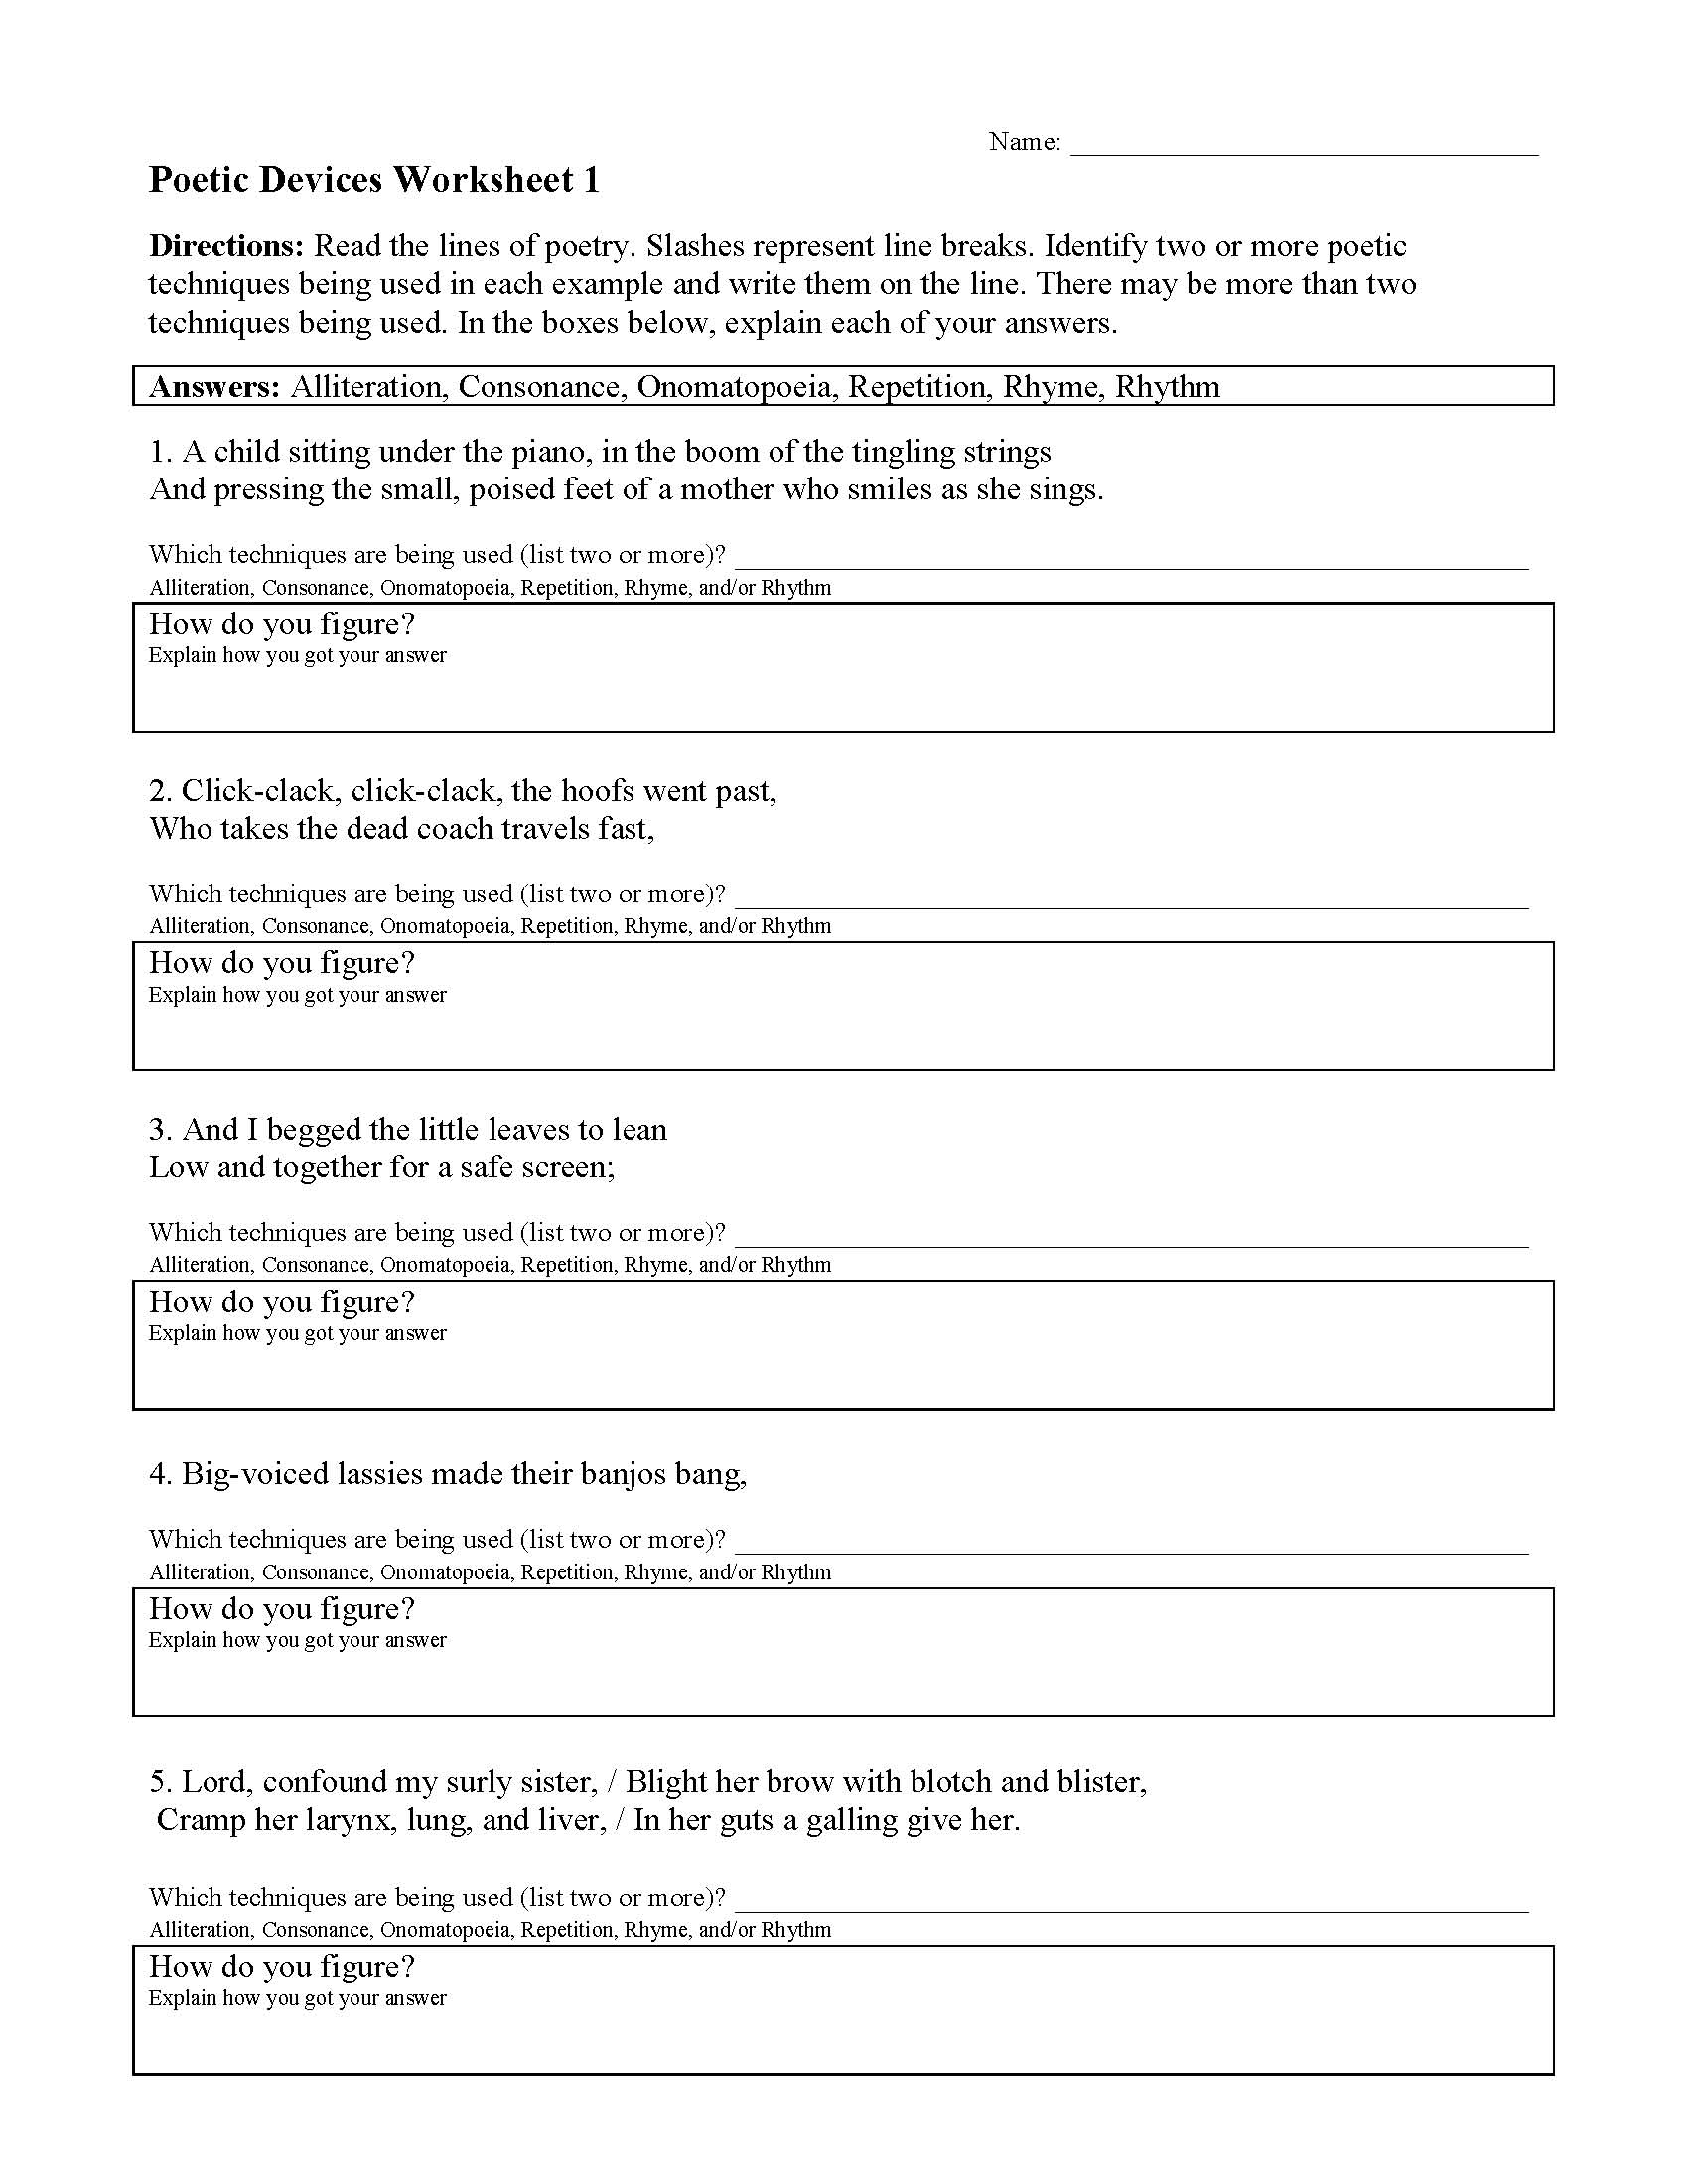 Poetic Devices Worksheet 23  Reading Activity Intended For Poetic Devices Worksheet 1